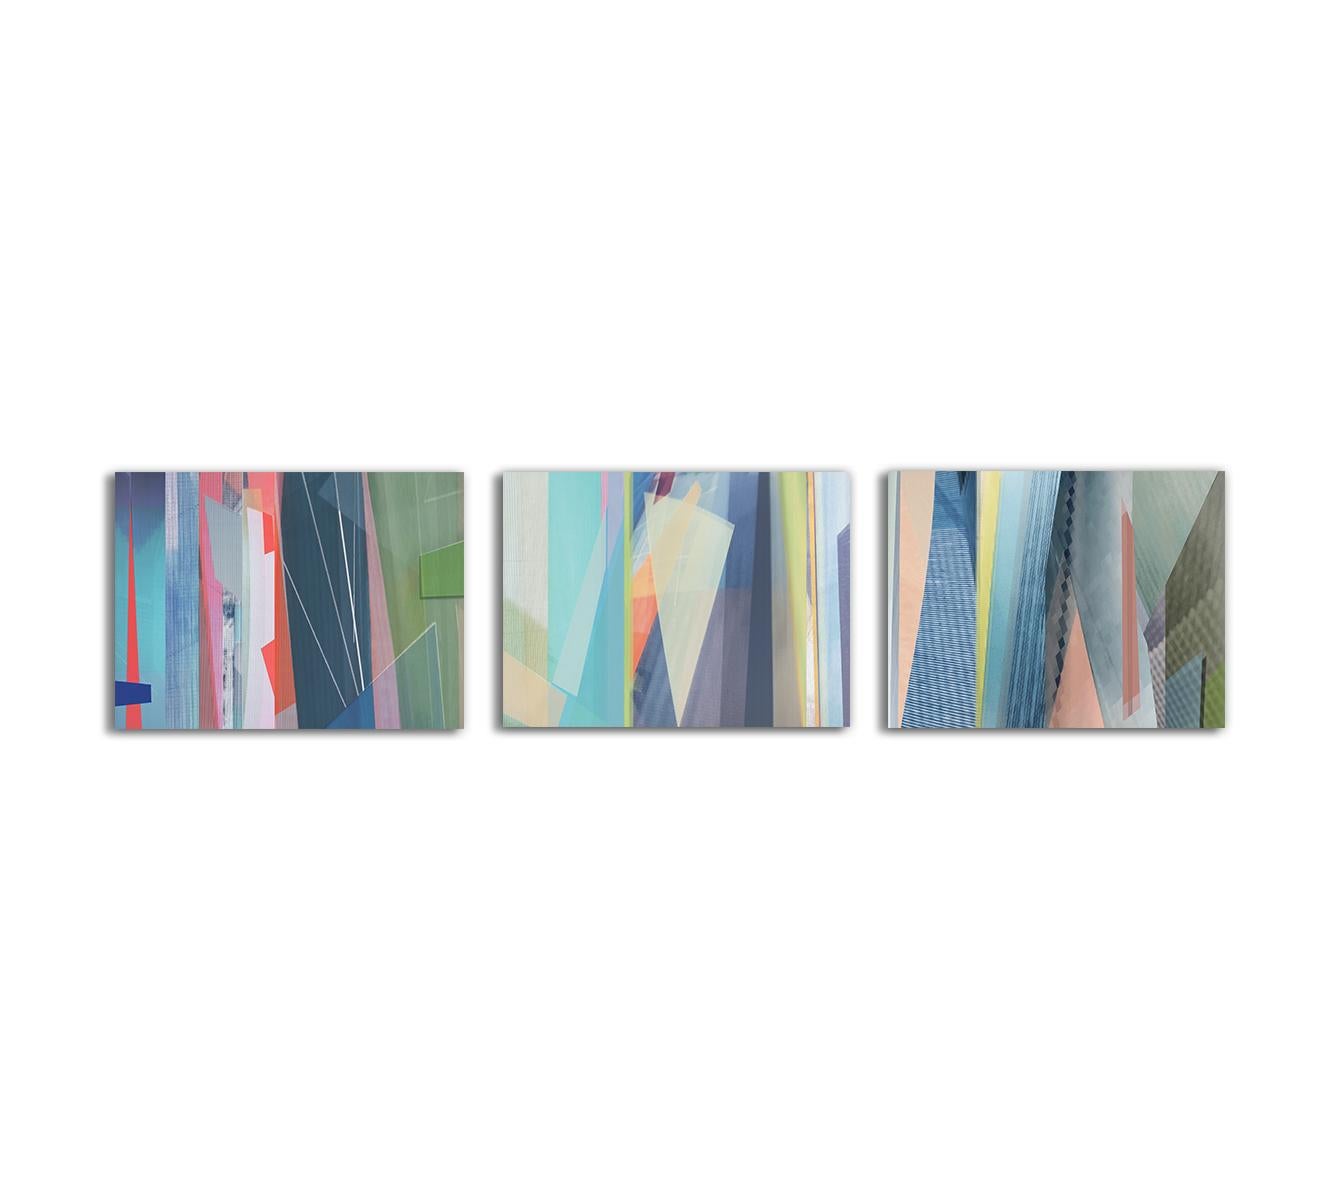 Monika Bravo Abstract Photograph - Parallel Fields #8, #9 and #6. Abstract limited edition color photograph